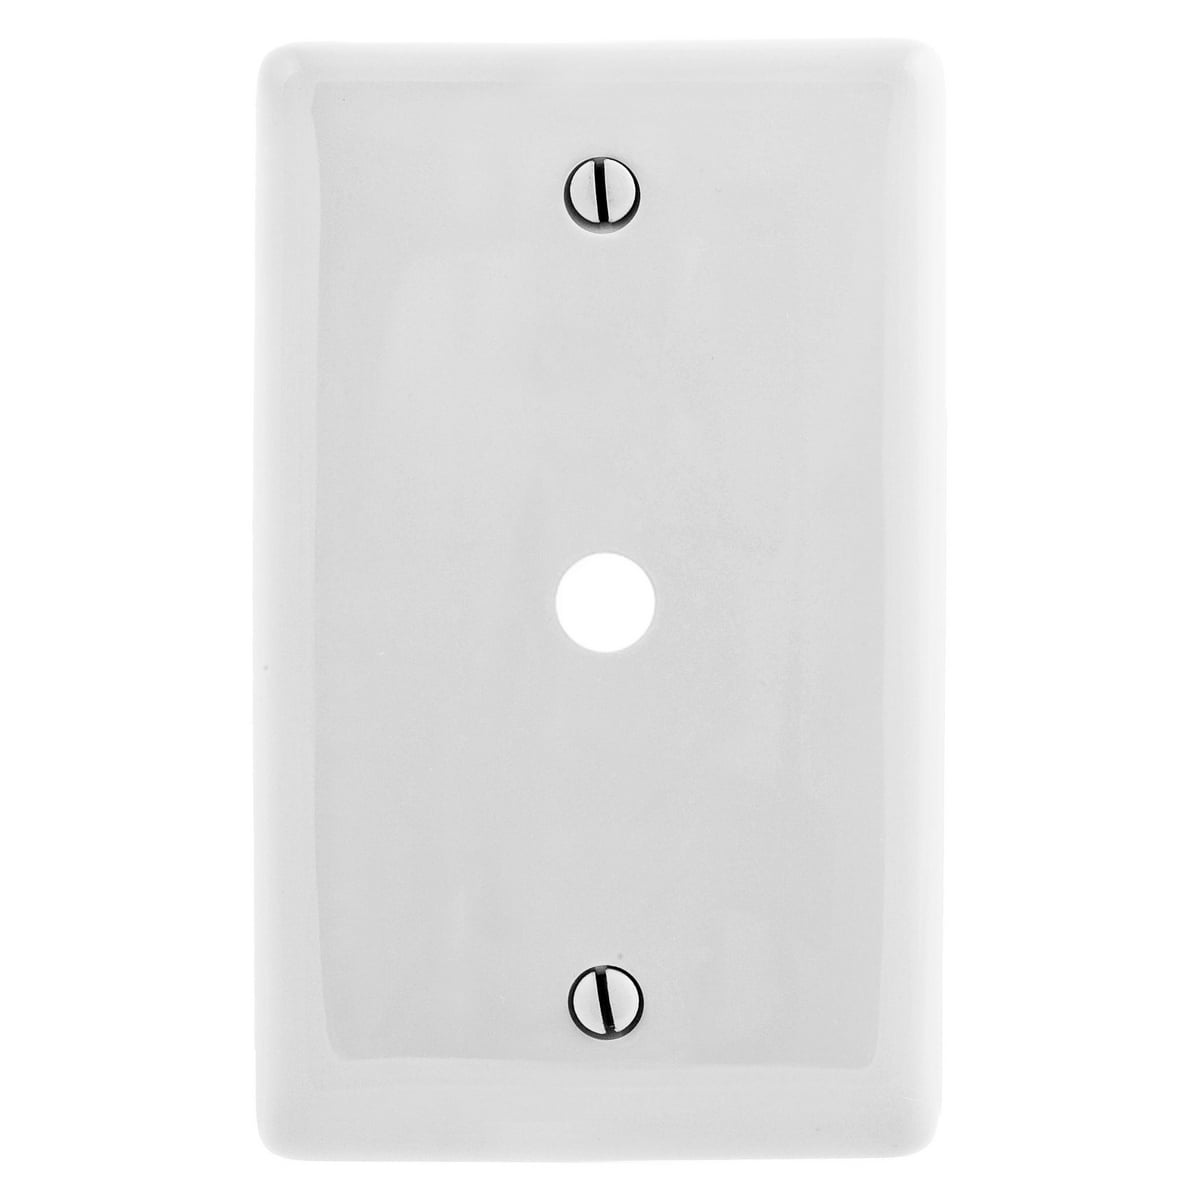 25pcs Details about   P8G Hubbell Grey Smooth Plastic Wall Plate Single Gang 